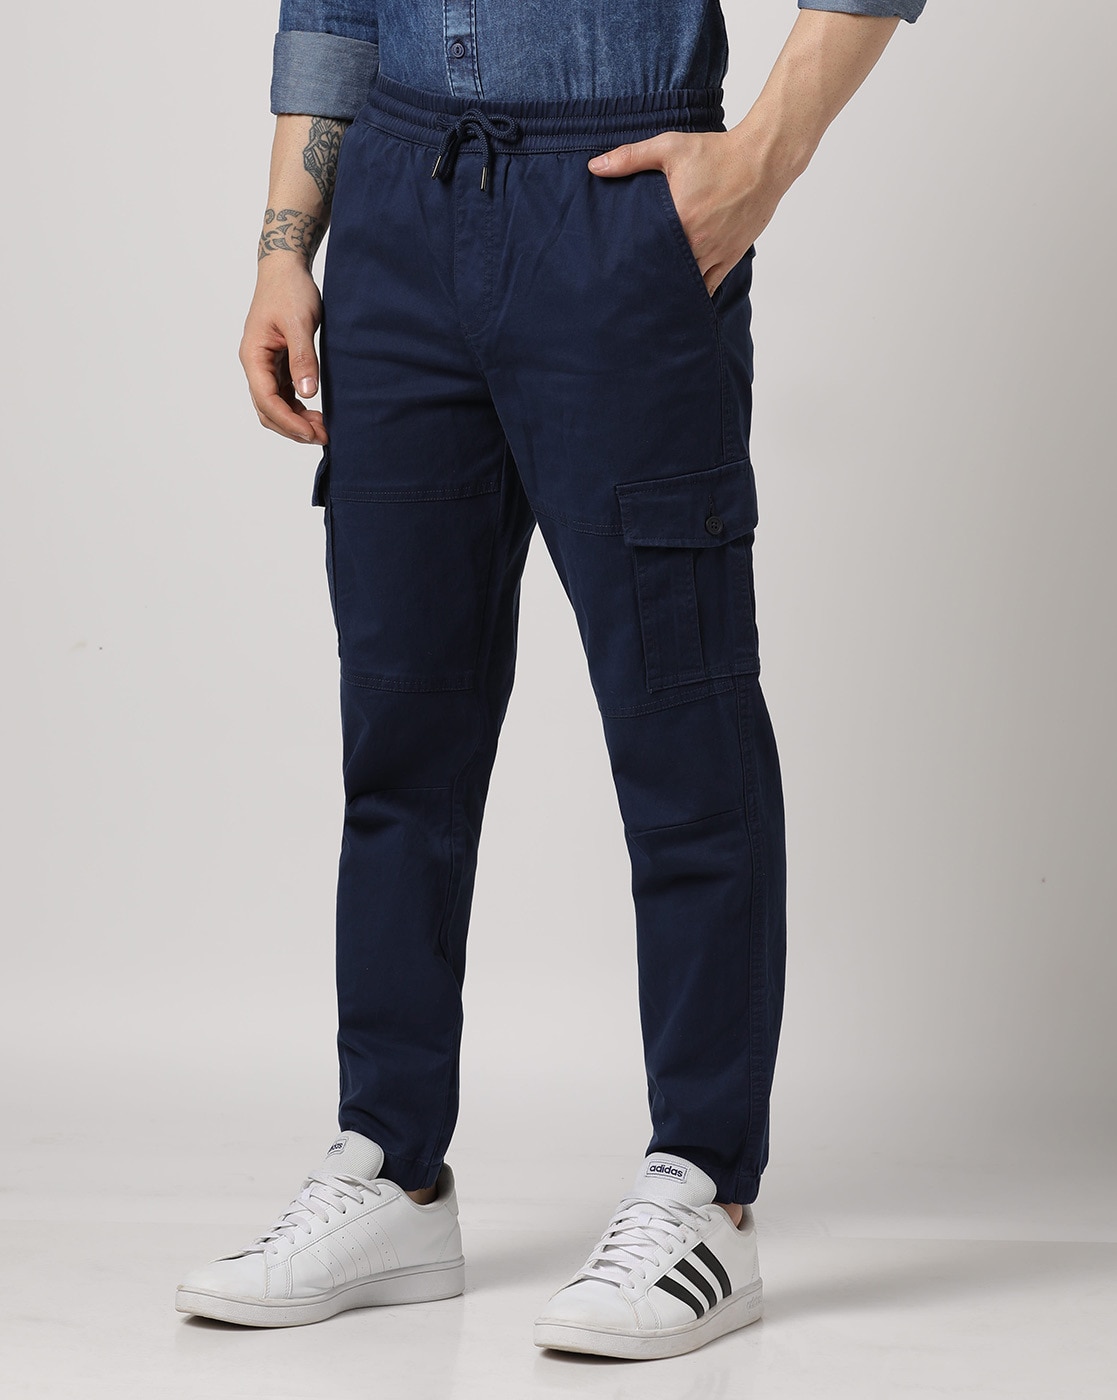 Off Duty Trousers and Pants  Buy Off Duty Korean Baggy Pants Black Online   Nykaa Fashion